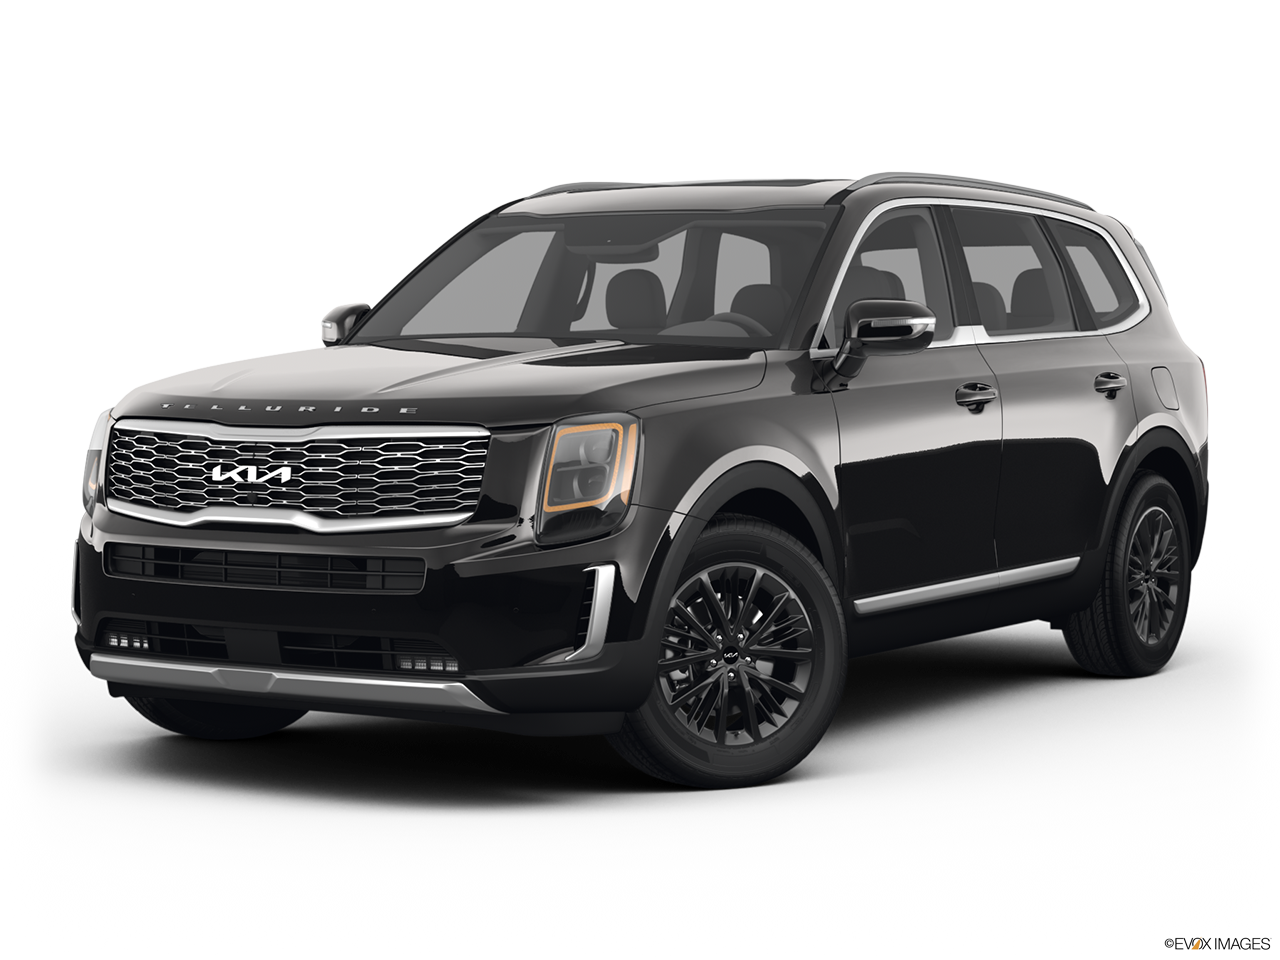 2022 Kia Telluride Research, Photos, Specs and Expertise CarMax